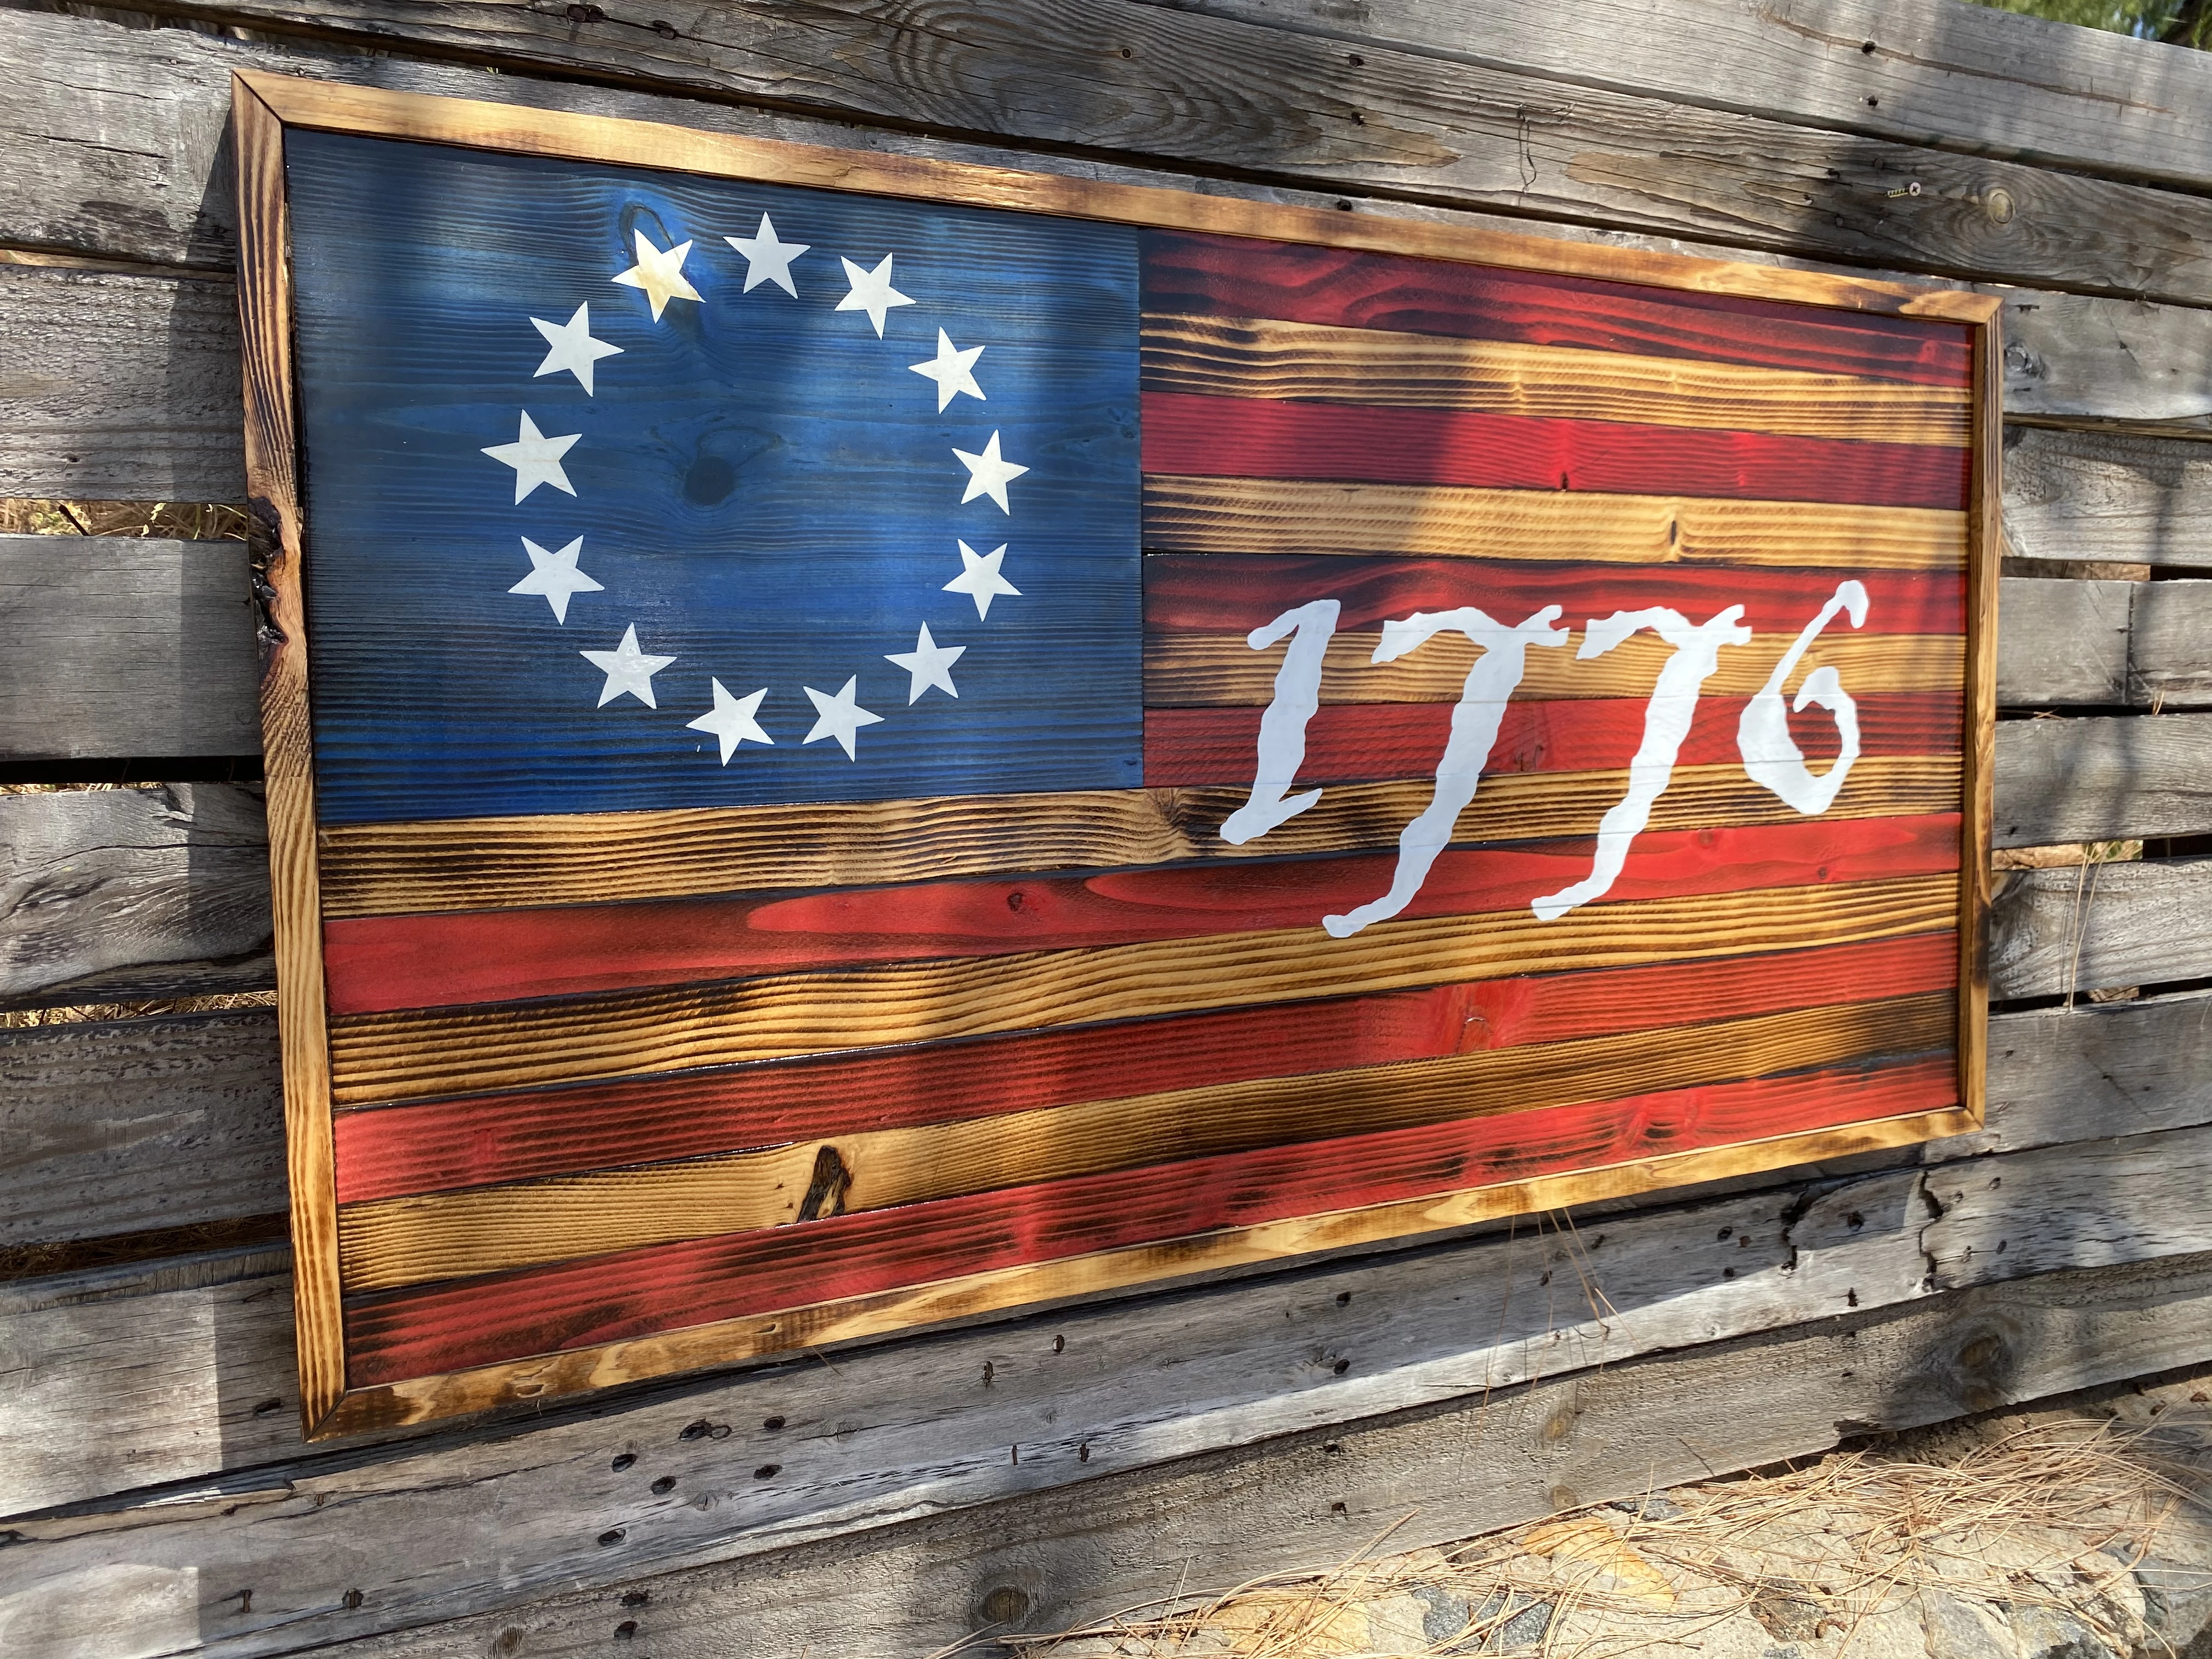 The Rustic 1776